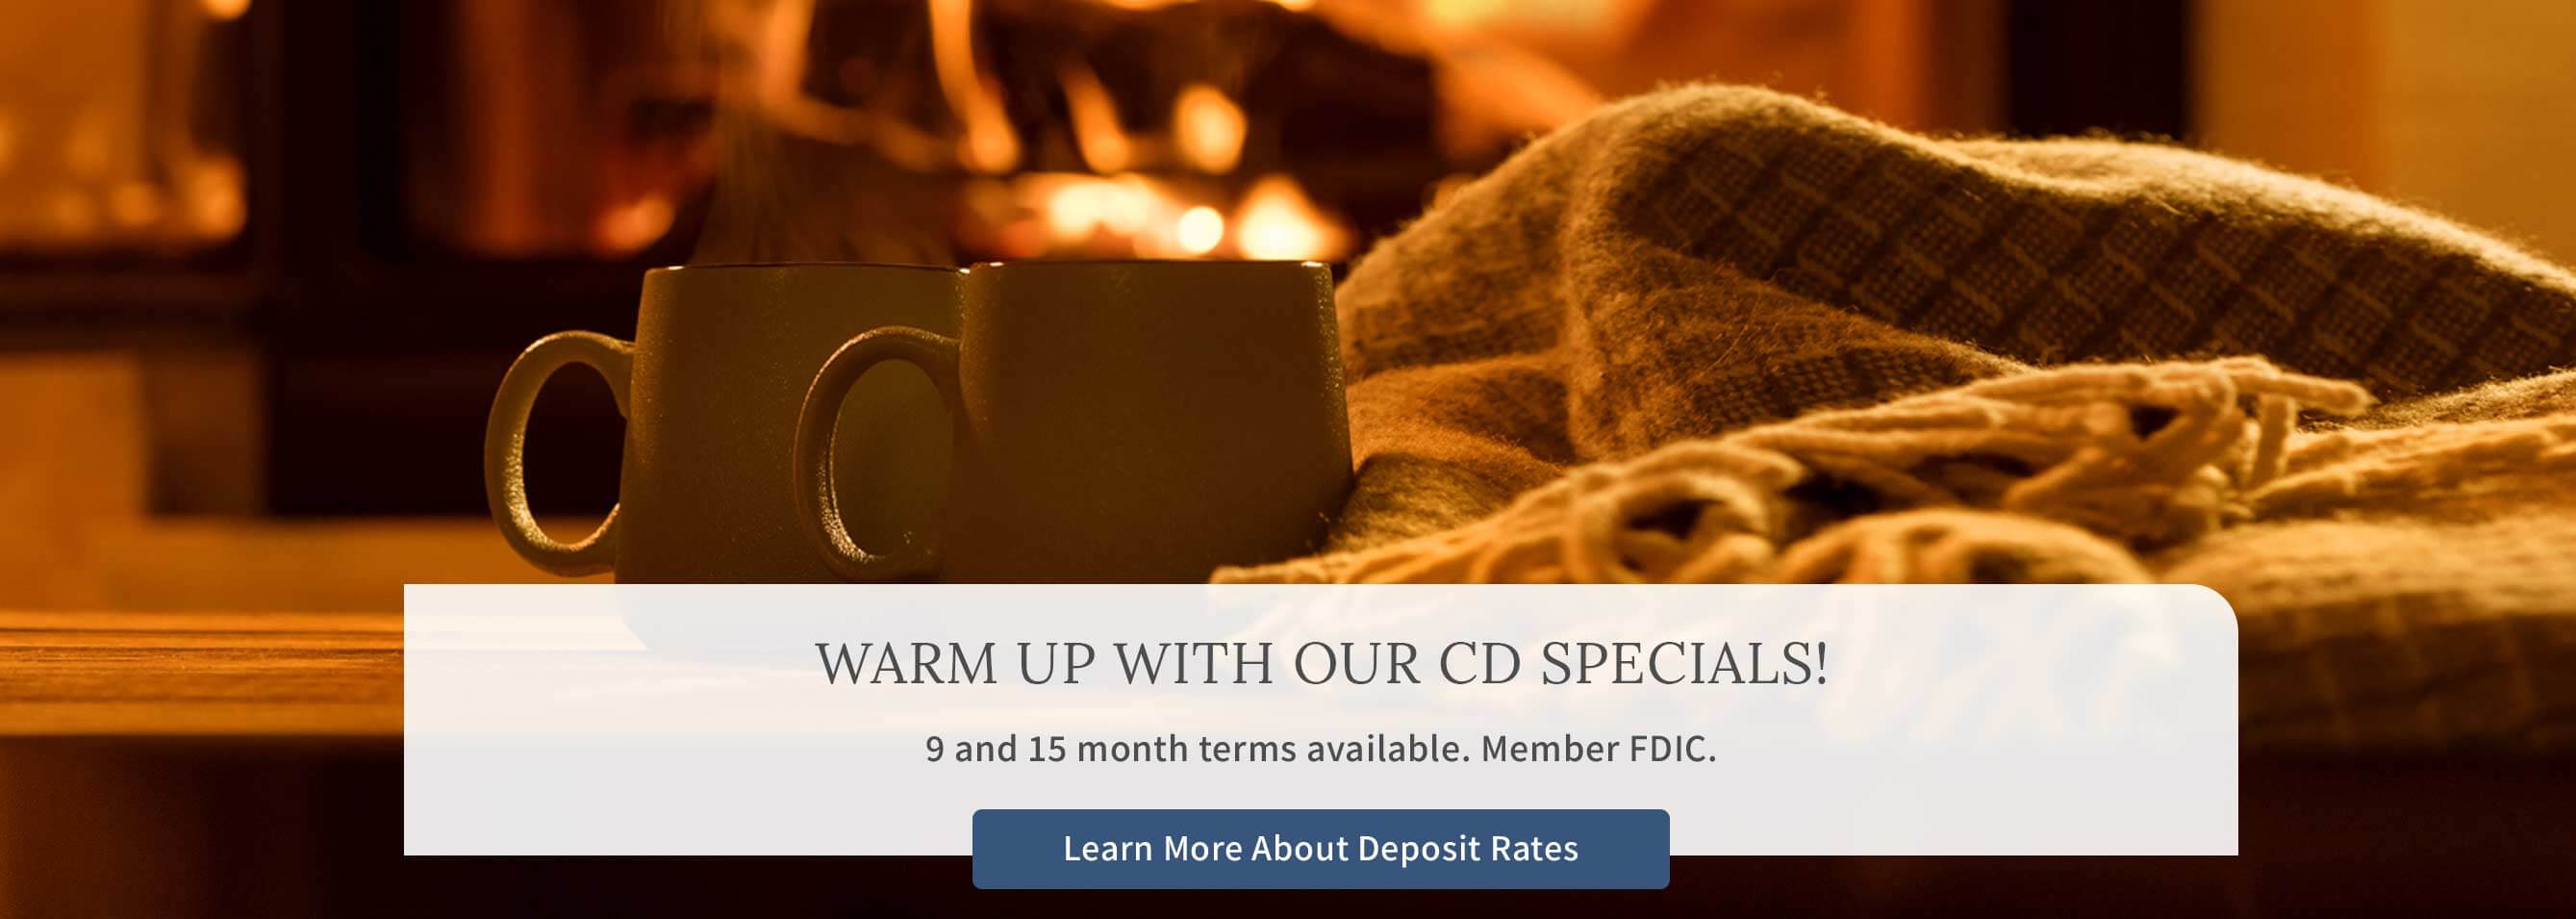 WARM UP WITH OUR CD SPECIALS! 9 and 15 month terms available. Member FDIC. Learn More About Deposit Rates